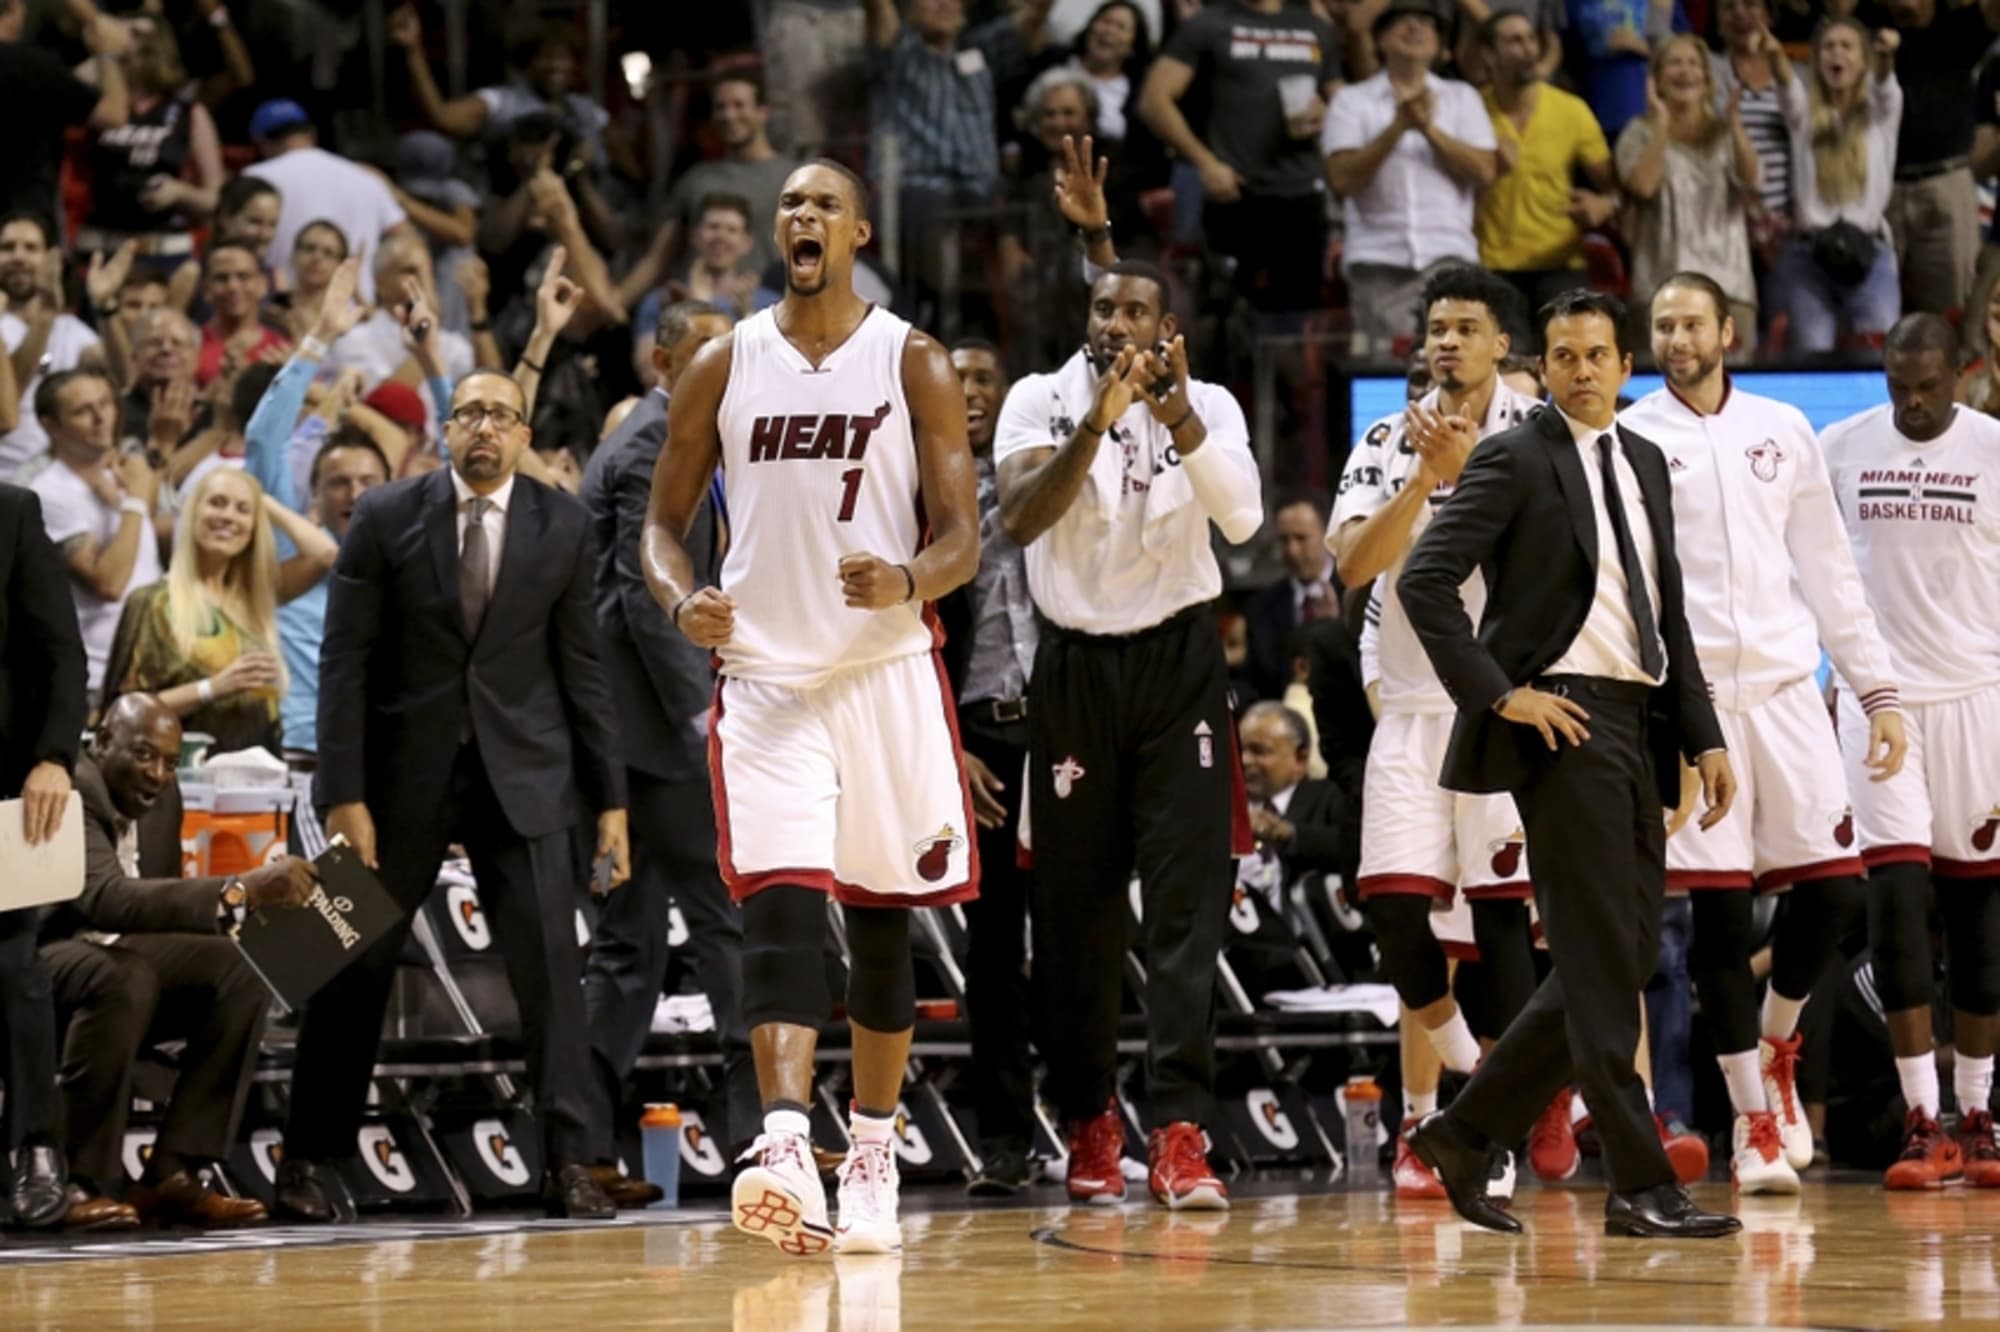 Chris Bosh has earned the right to fight for his career